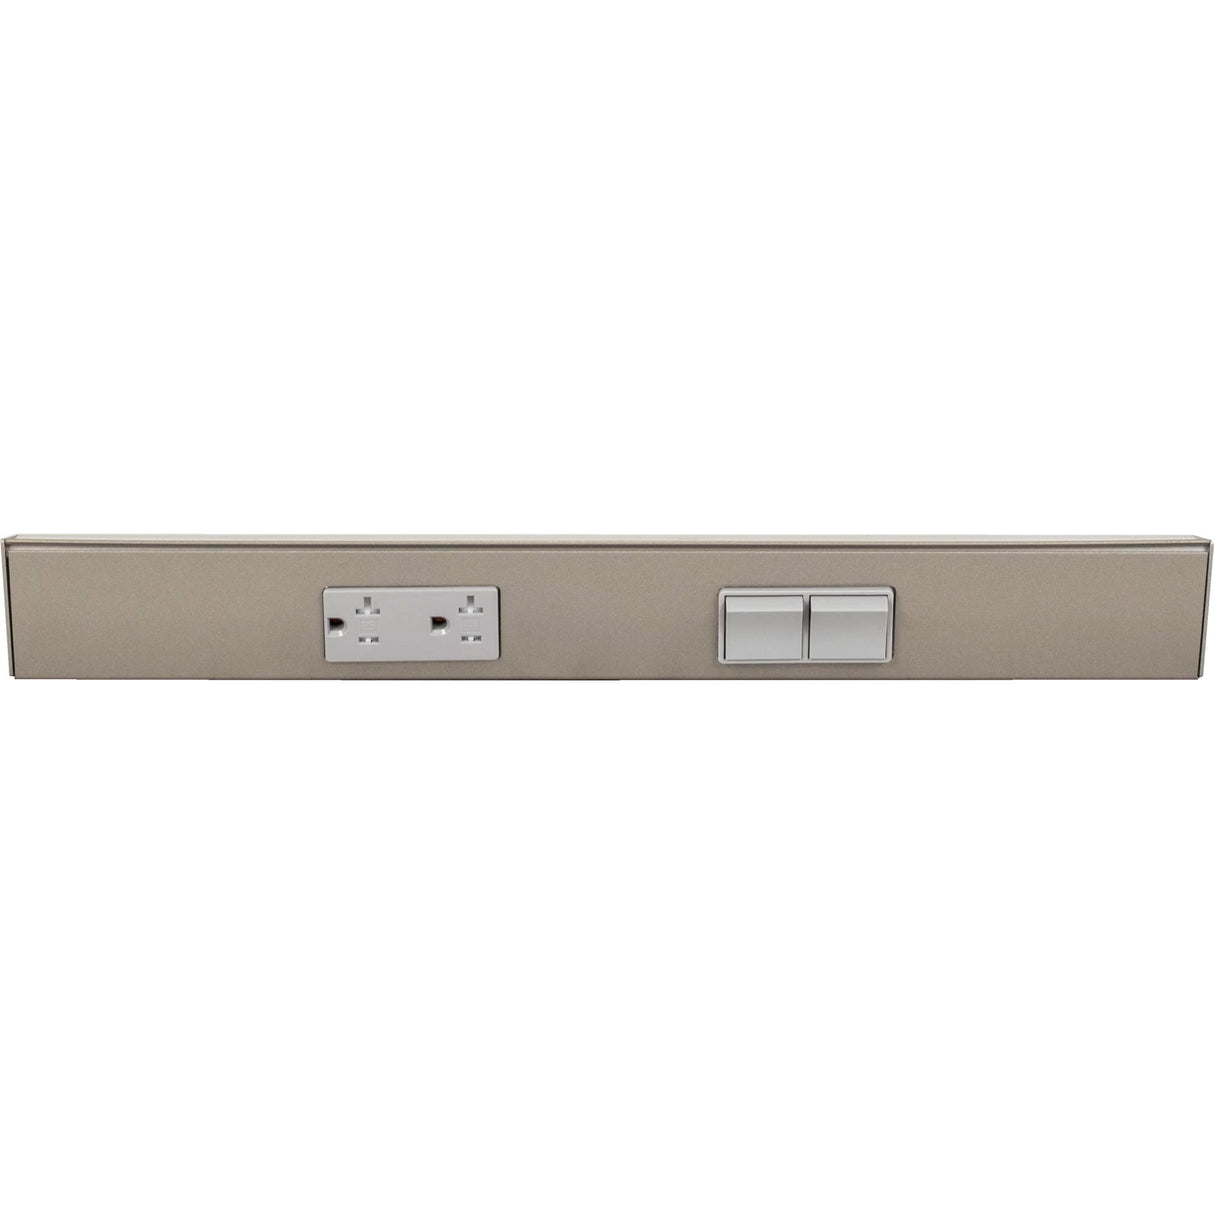 Task Lighting TRS18-2G-SN-RS 18" TR Switch Series Angle Power Strip, Right Switches, Satin Nickel Finish, Grey Switches and Receptacles